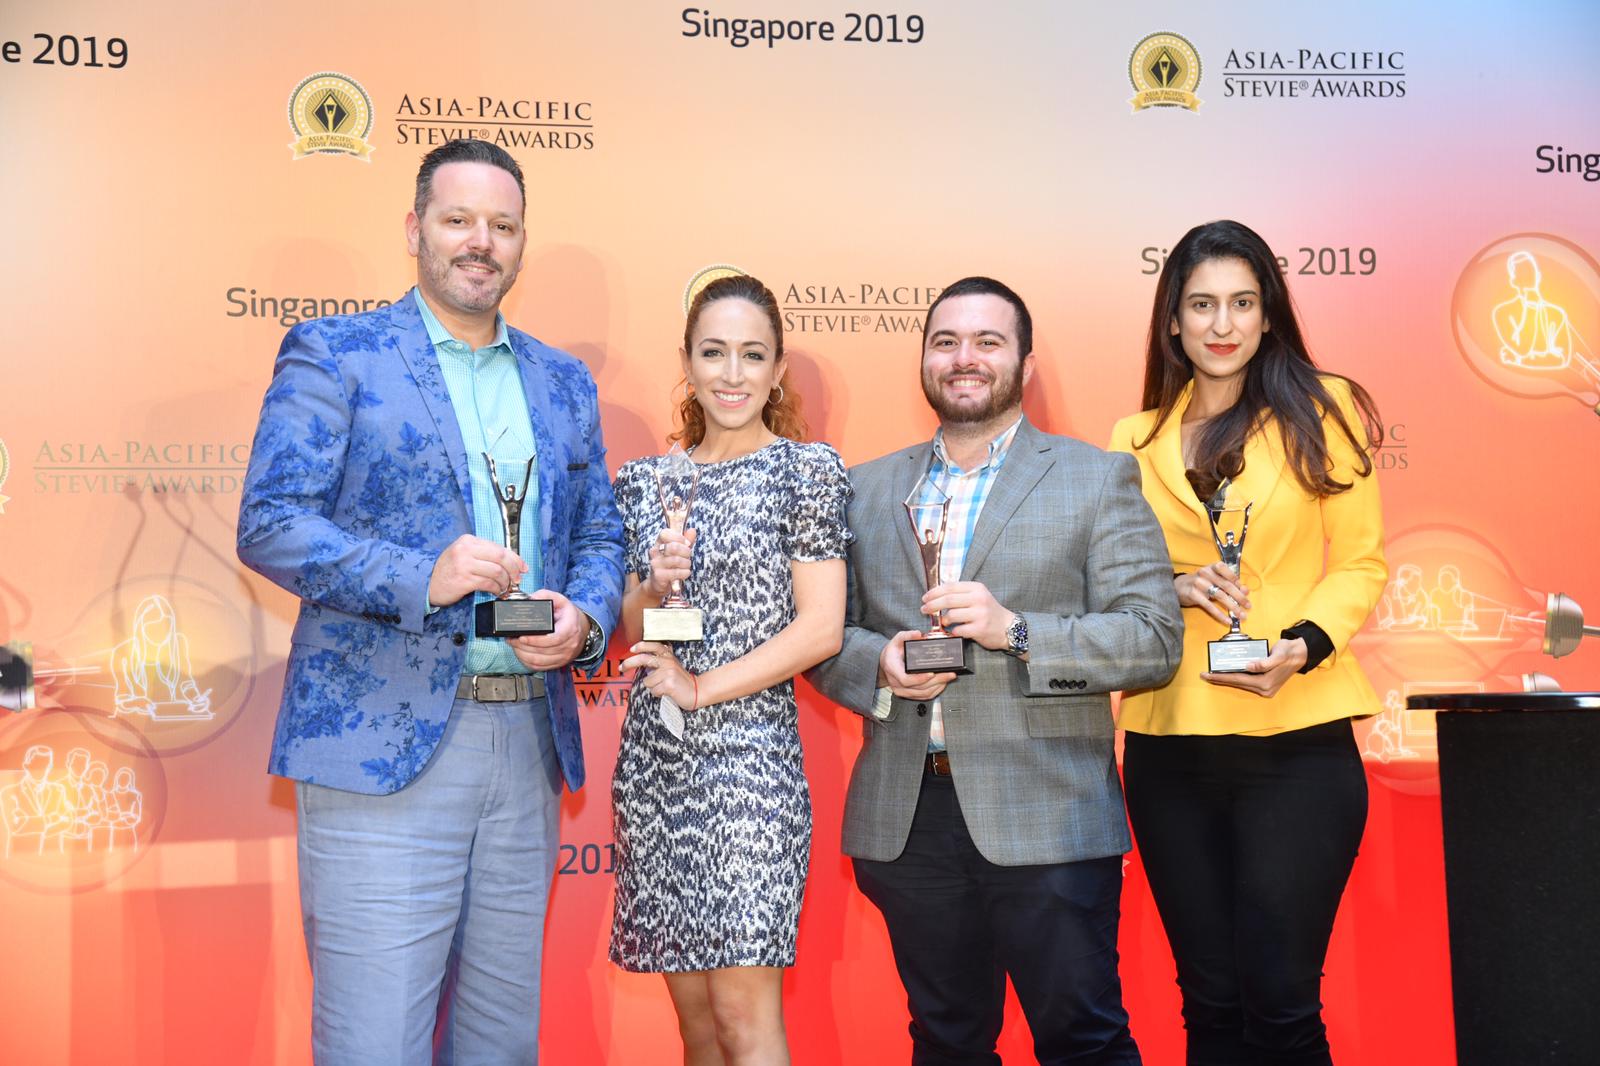 <a class="wonderplugin-gridgallery-posttitle-link" href="https://effcreative.com/gallery/asia-pacific-awards-2019/">Asia Pacific Awards, 2019</a>